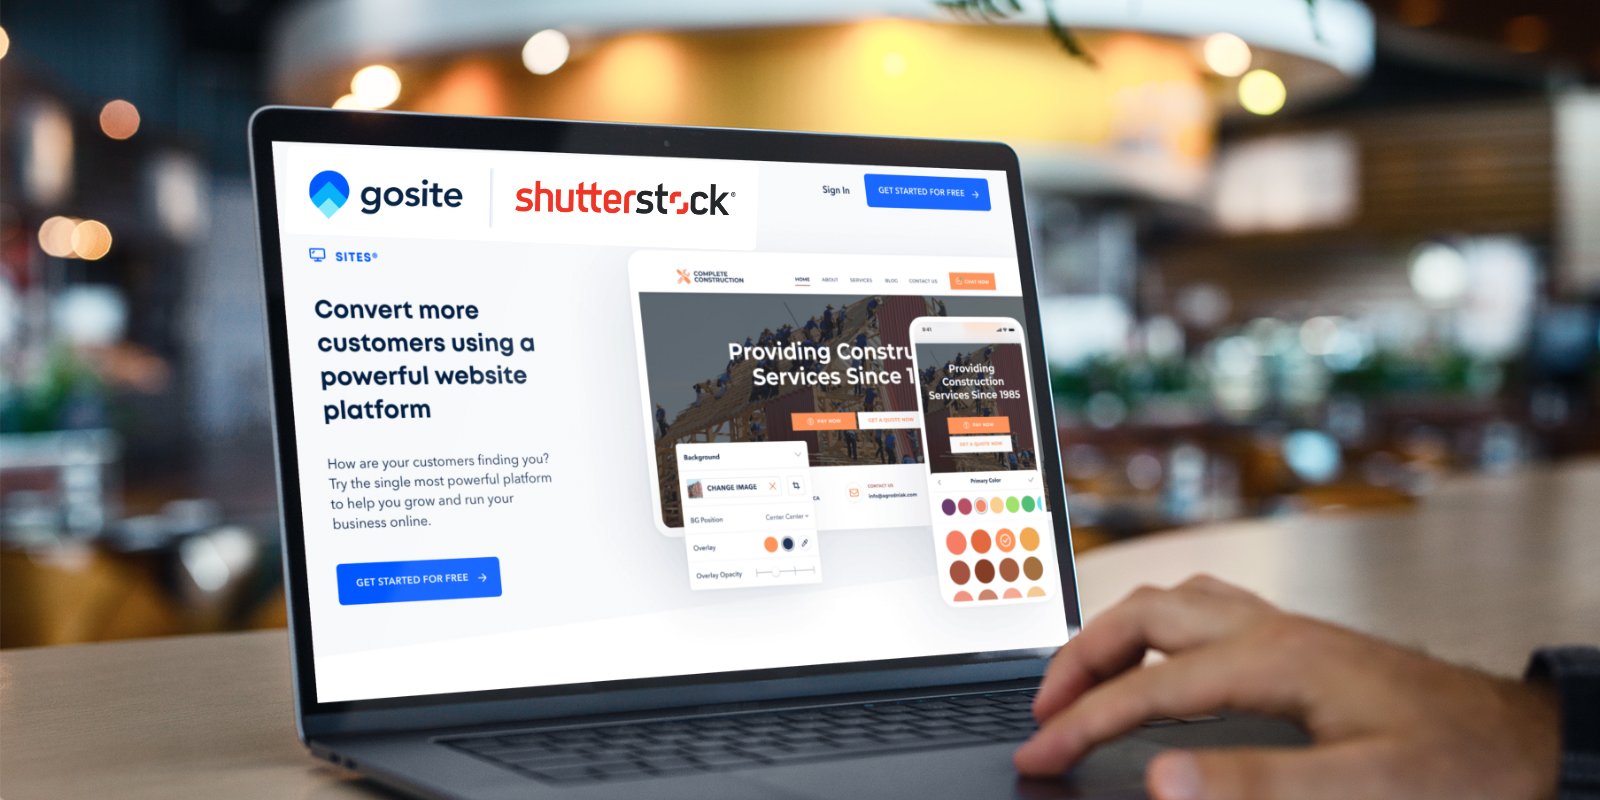 gosite and shutterstock logos on computer screen